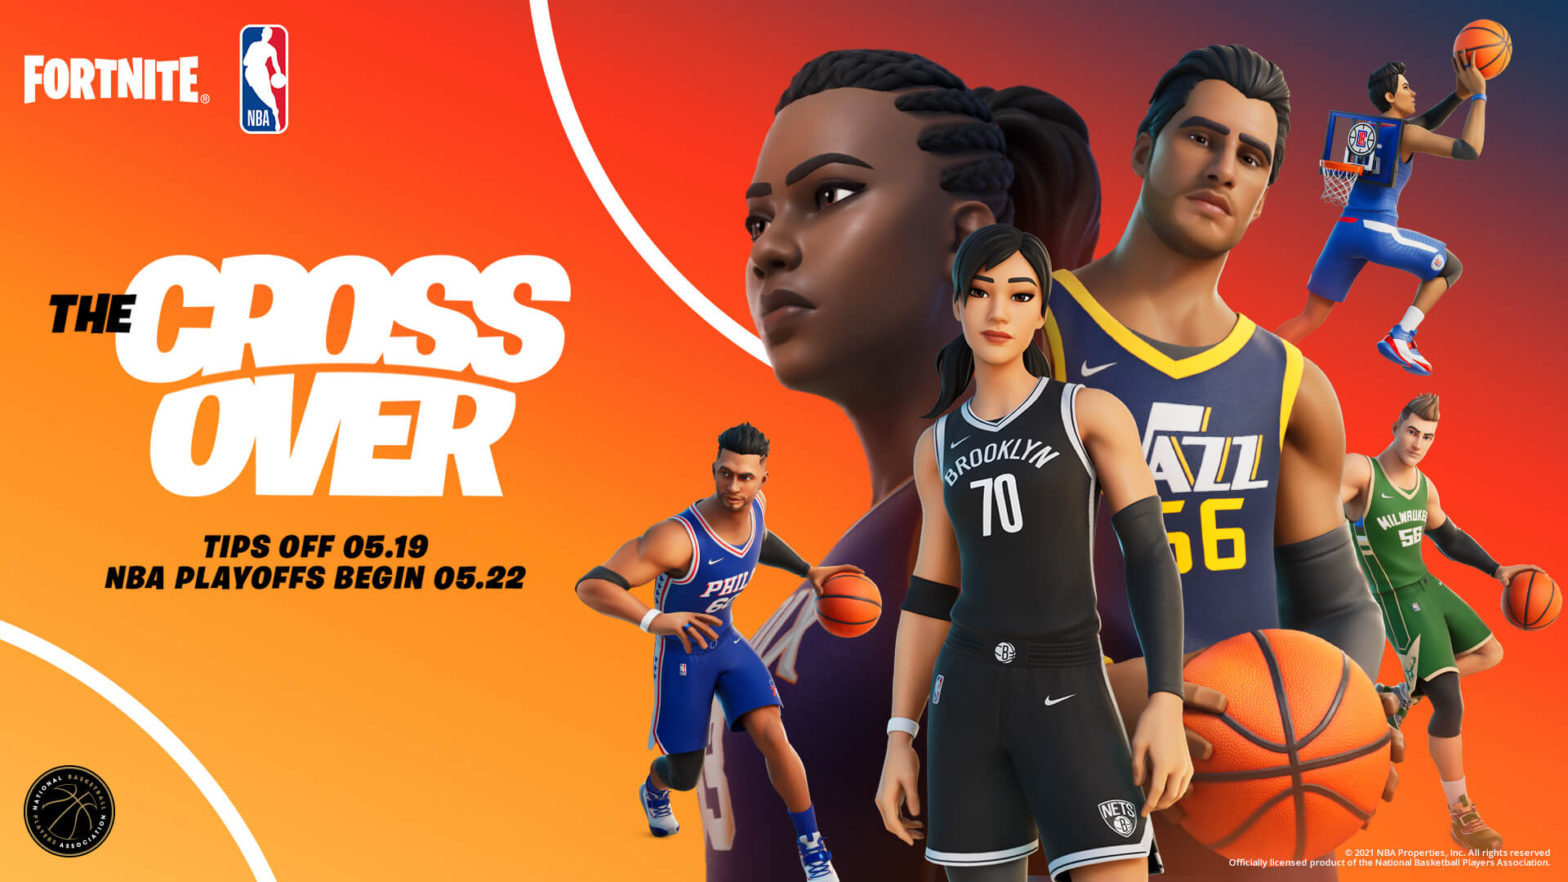 Fortnite x NBA crossover to celebrate the 2021 NBA Playoffs Esports.gg